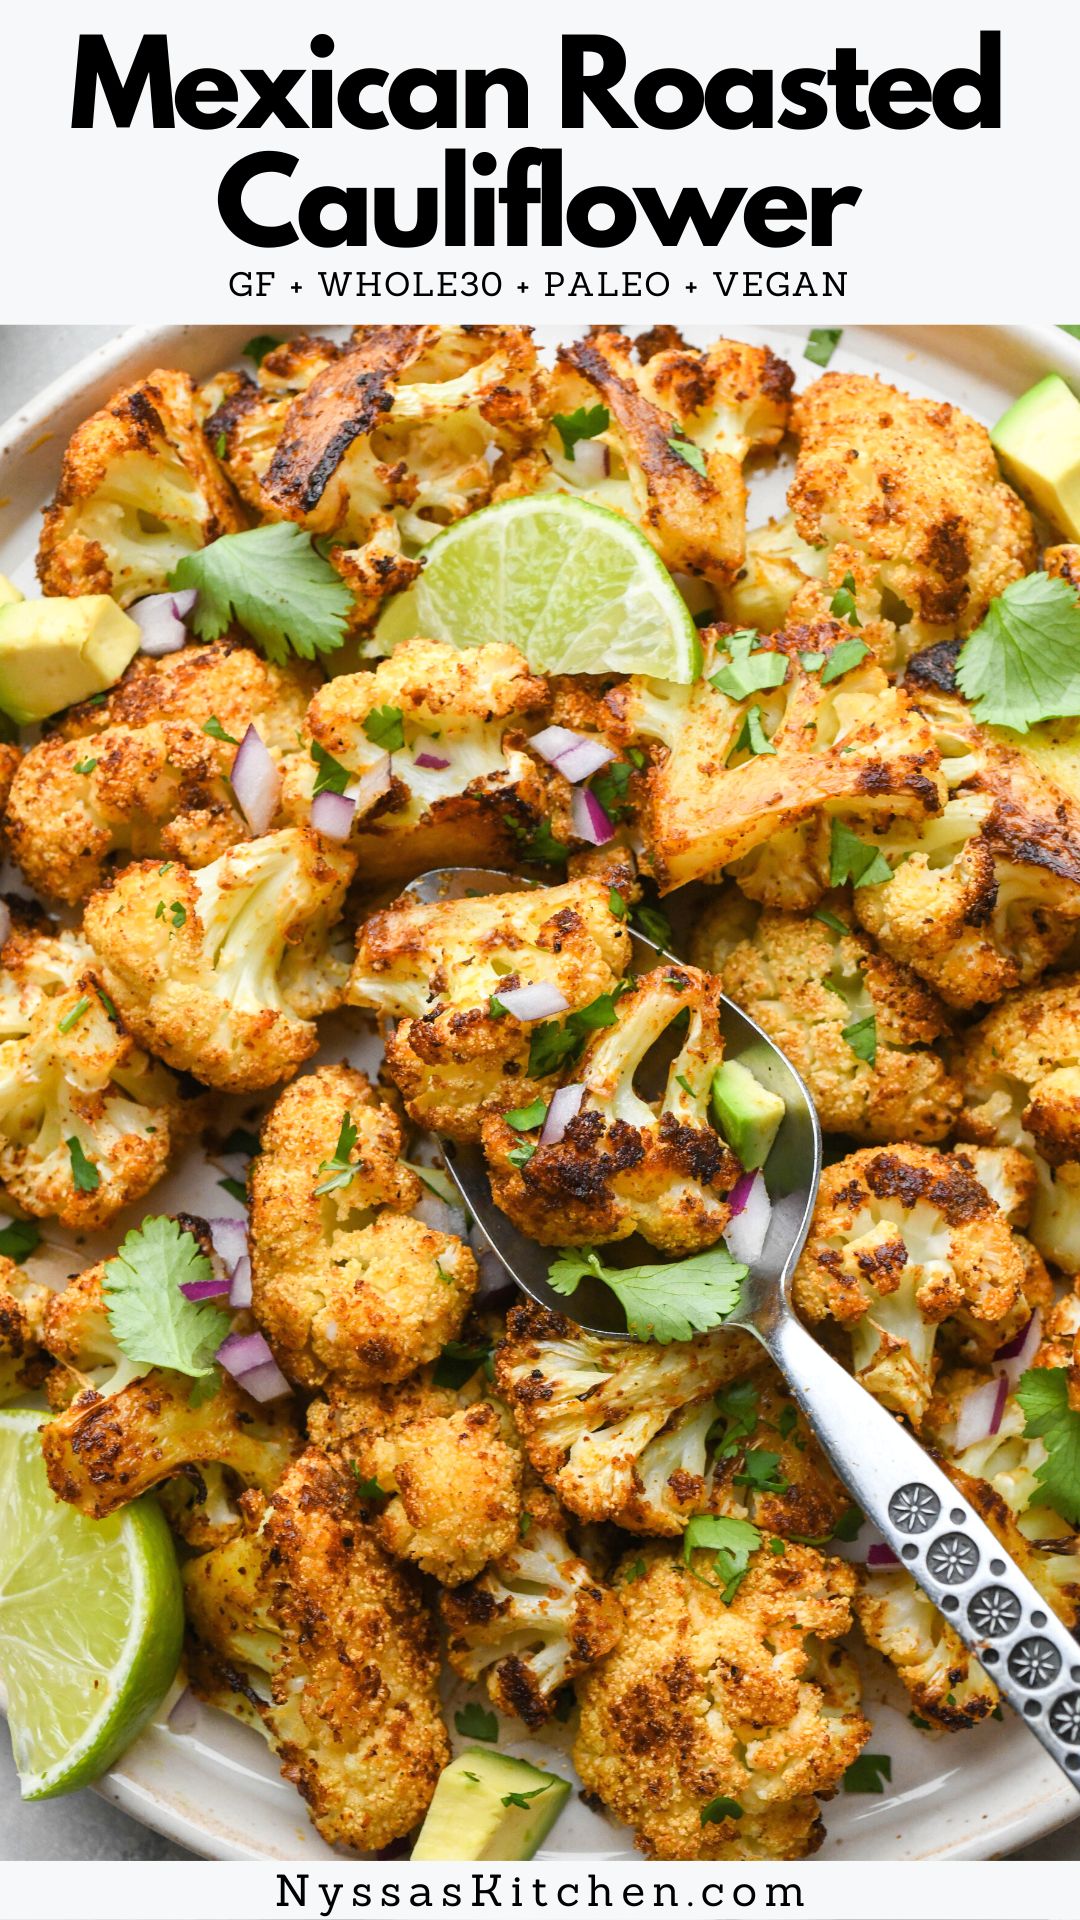 Mexican inspired roasted cauliflower is so flavorful and easy it might just become your new favorite veggie side dish! Cauliflower florets are tossed with flavorful spices and roasted until crispy and caramelized, served with a healthy squeeze of lime juice, cilantro, red onion, and maybe even some avocado for good measure. Gluten free, paleo, vegan, AND whole30 friendly!